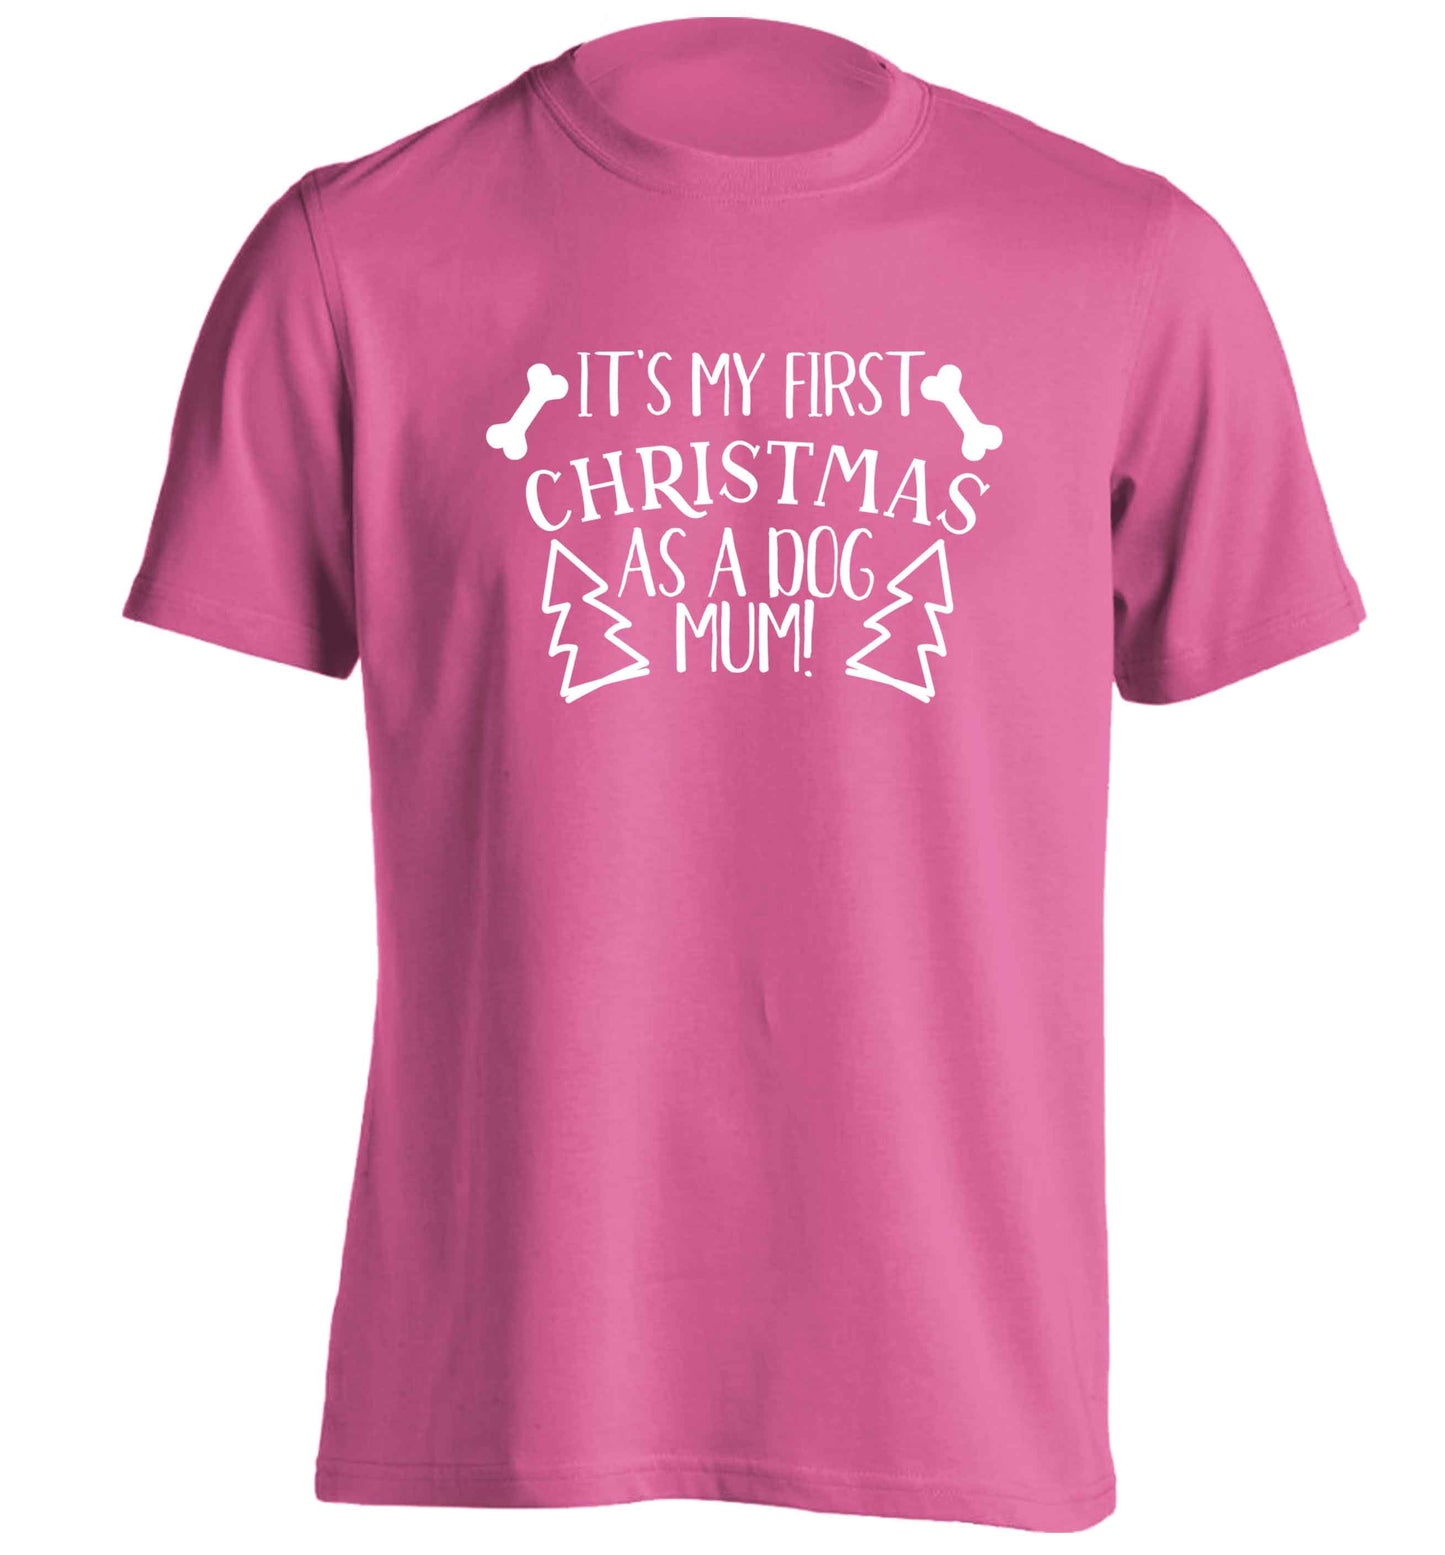 It's my first Christmas as a dog mum! adults unisex pink Tshirt 2XL